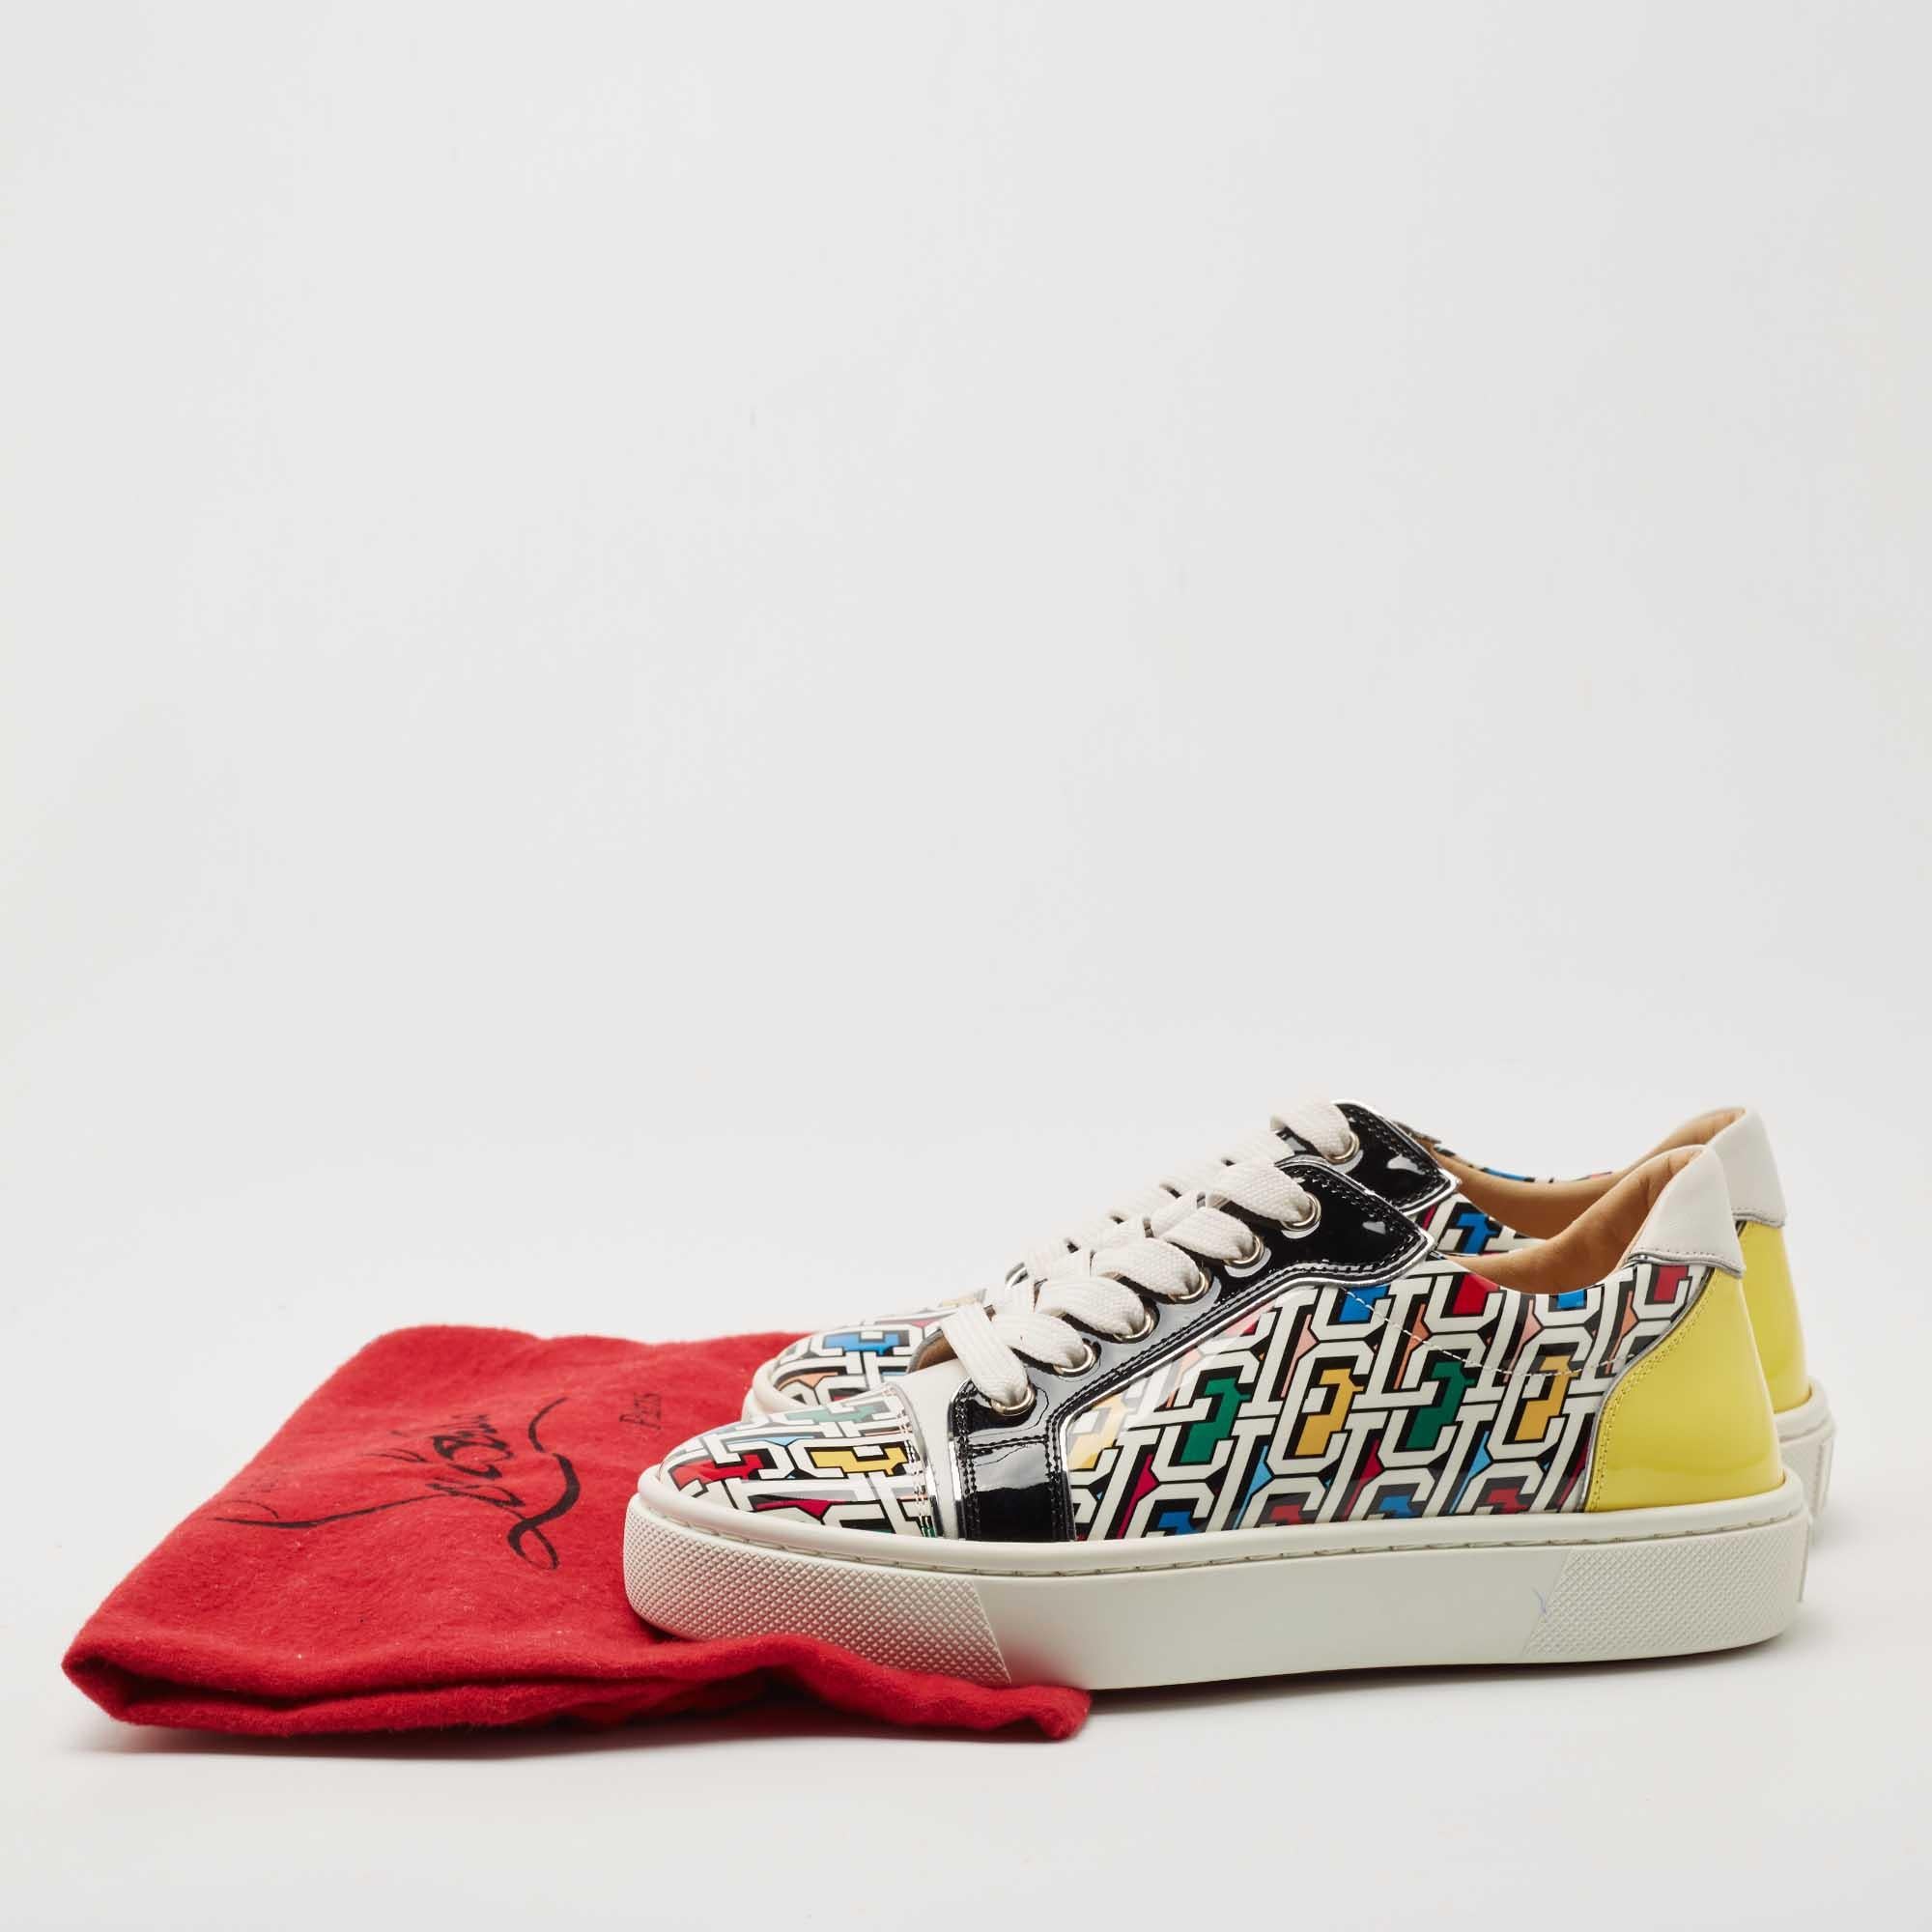 Christian Louboutin Multicolor Patent Vierissima Low Top Sneakers Size 37 4